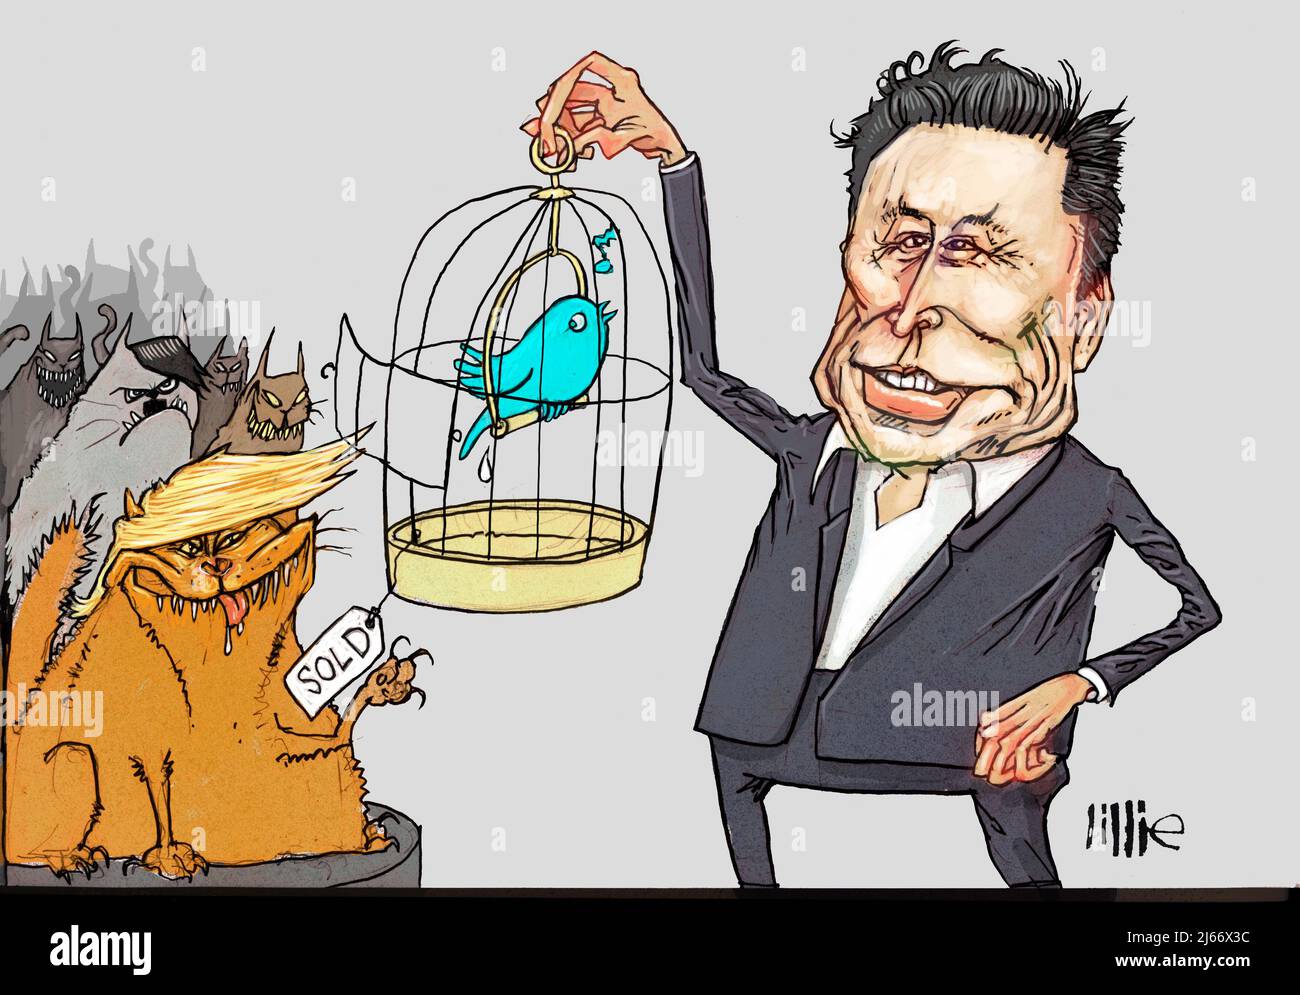 Funny caricature Elon Musk holding blue bird, cage open, cats looking hungry, illustrating fears about his free speech plan after plans to buy Twitter Stock Photo